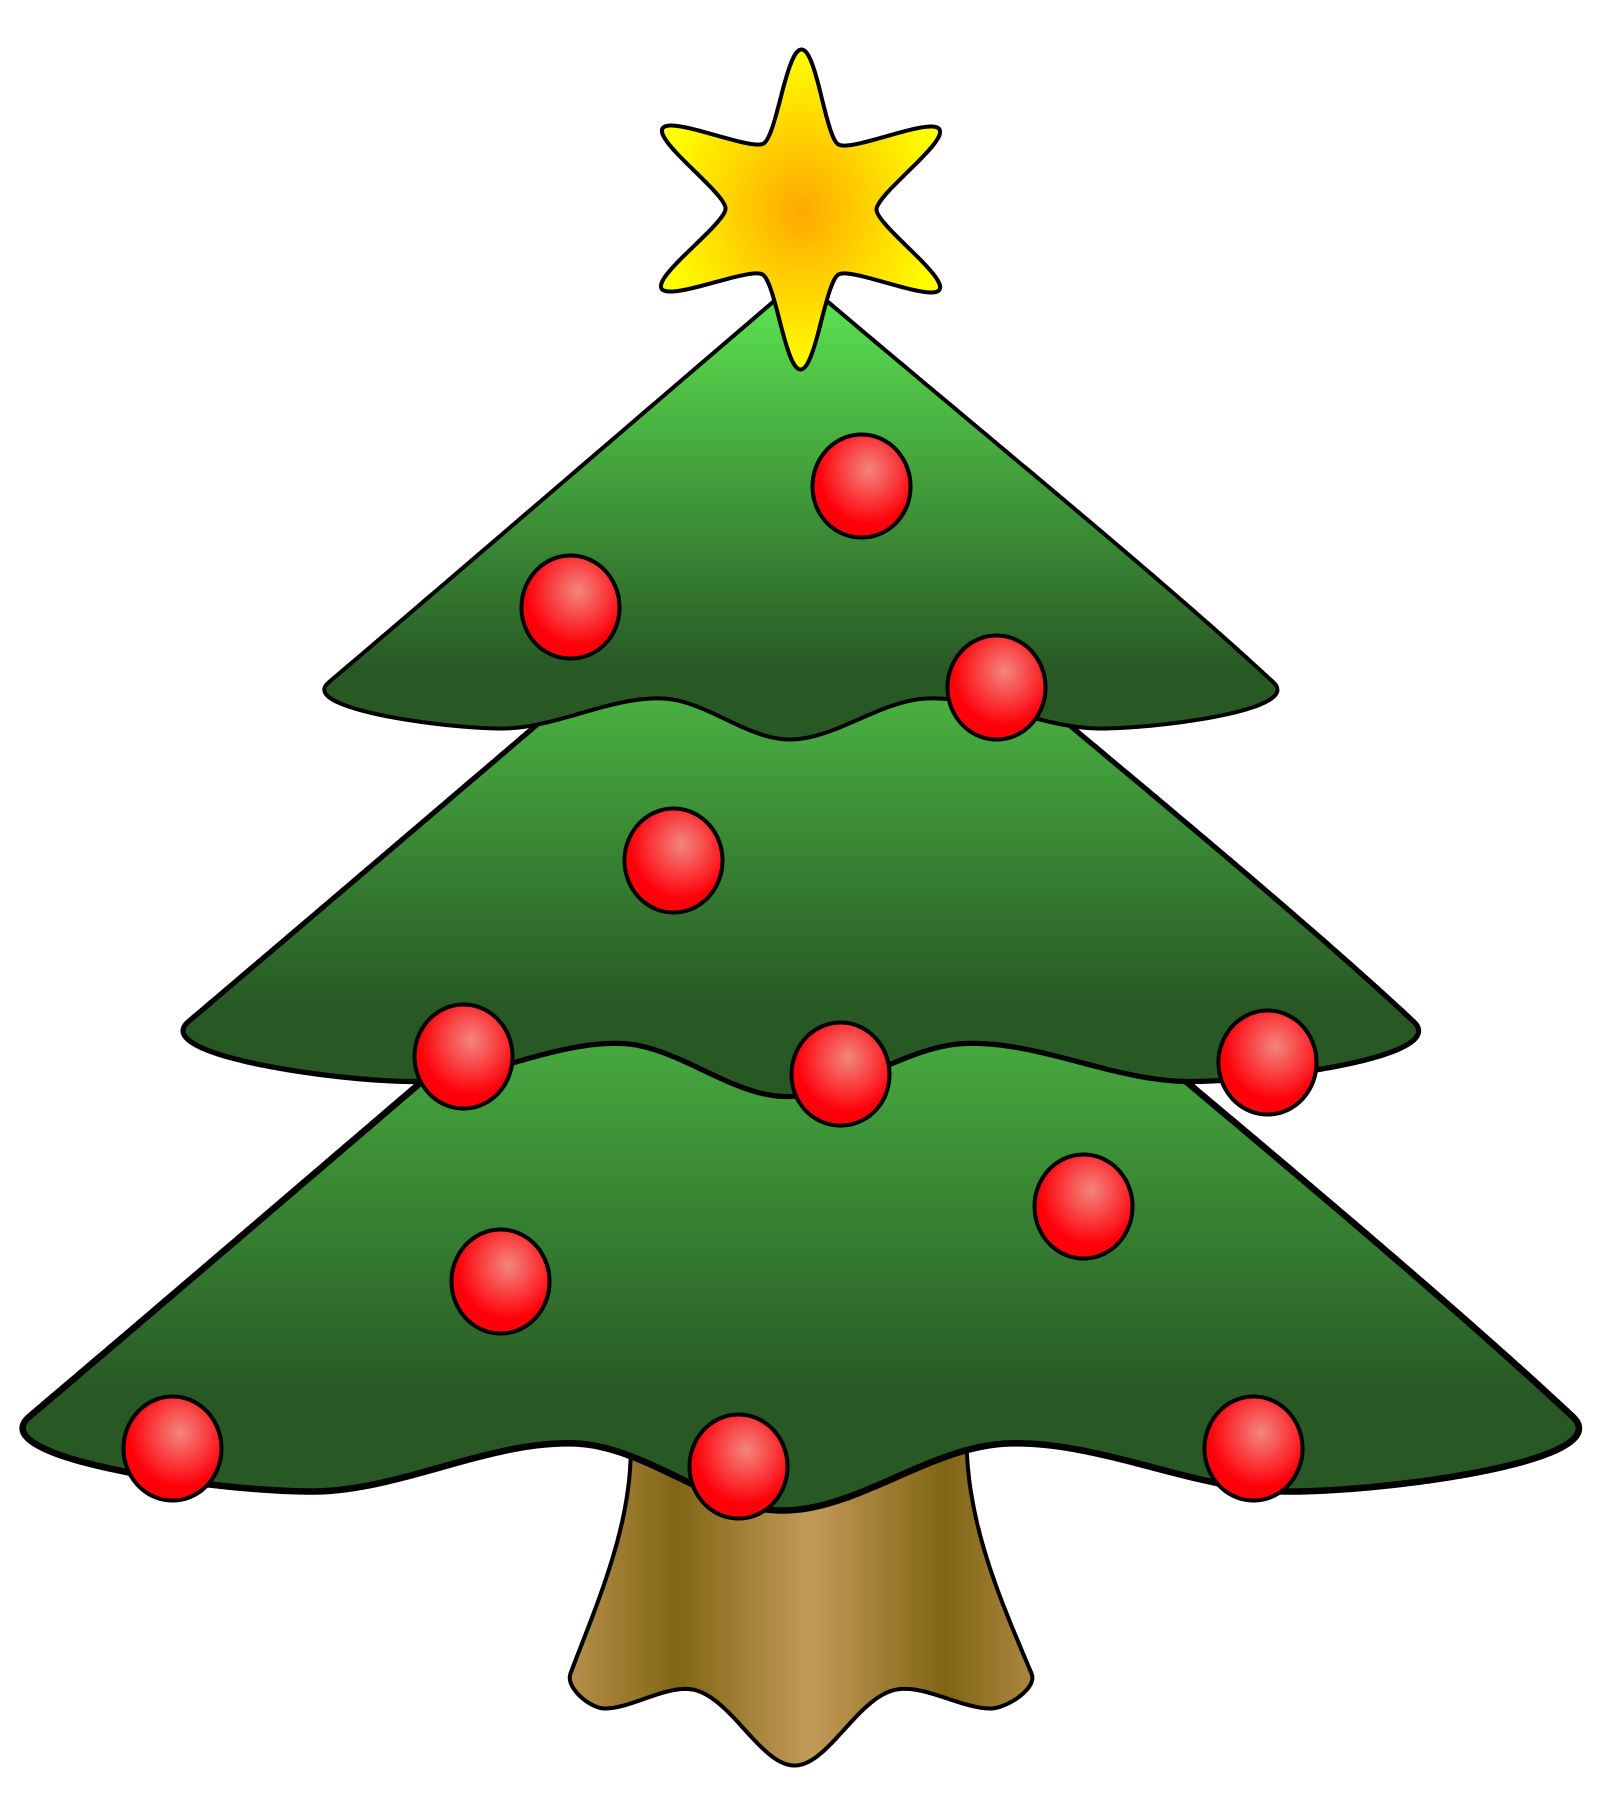 Clip Art Of Christmas Tree Picture 143799 Royalty Free Vector